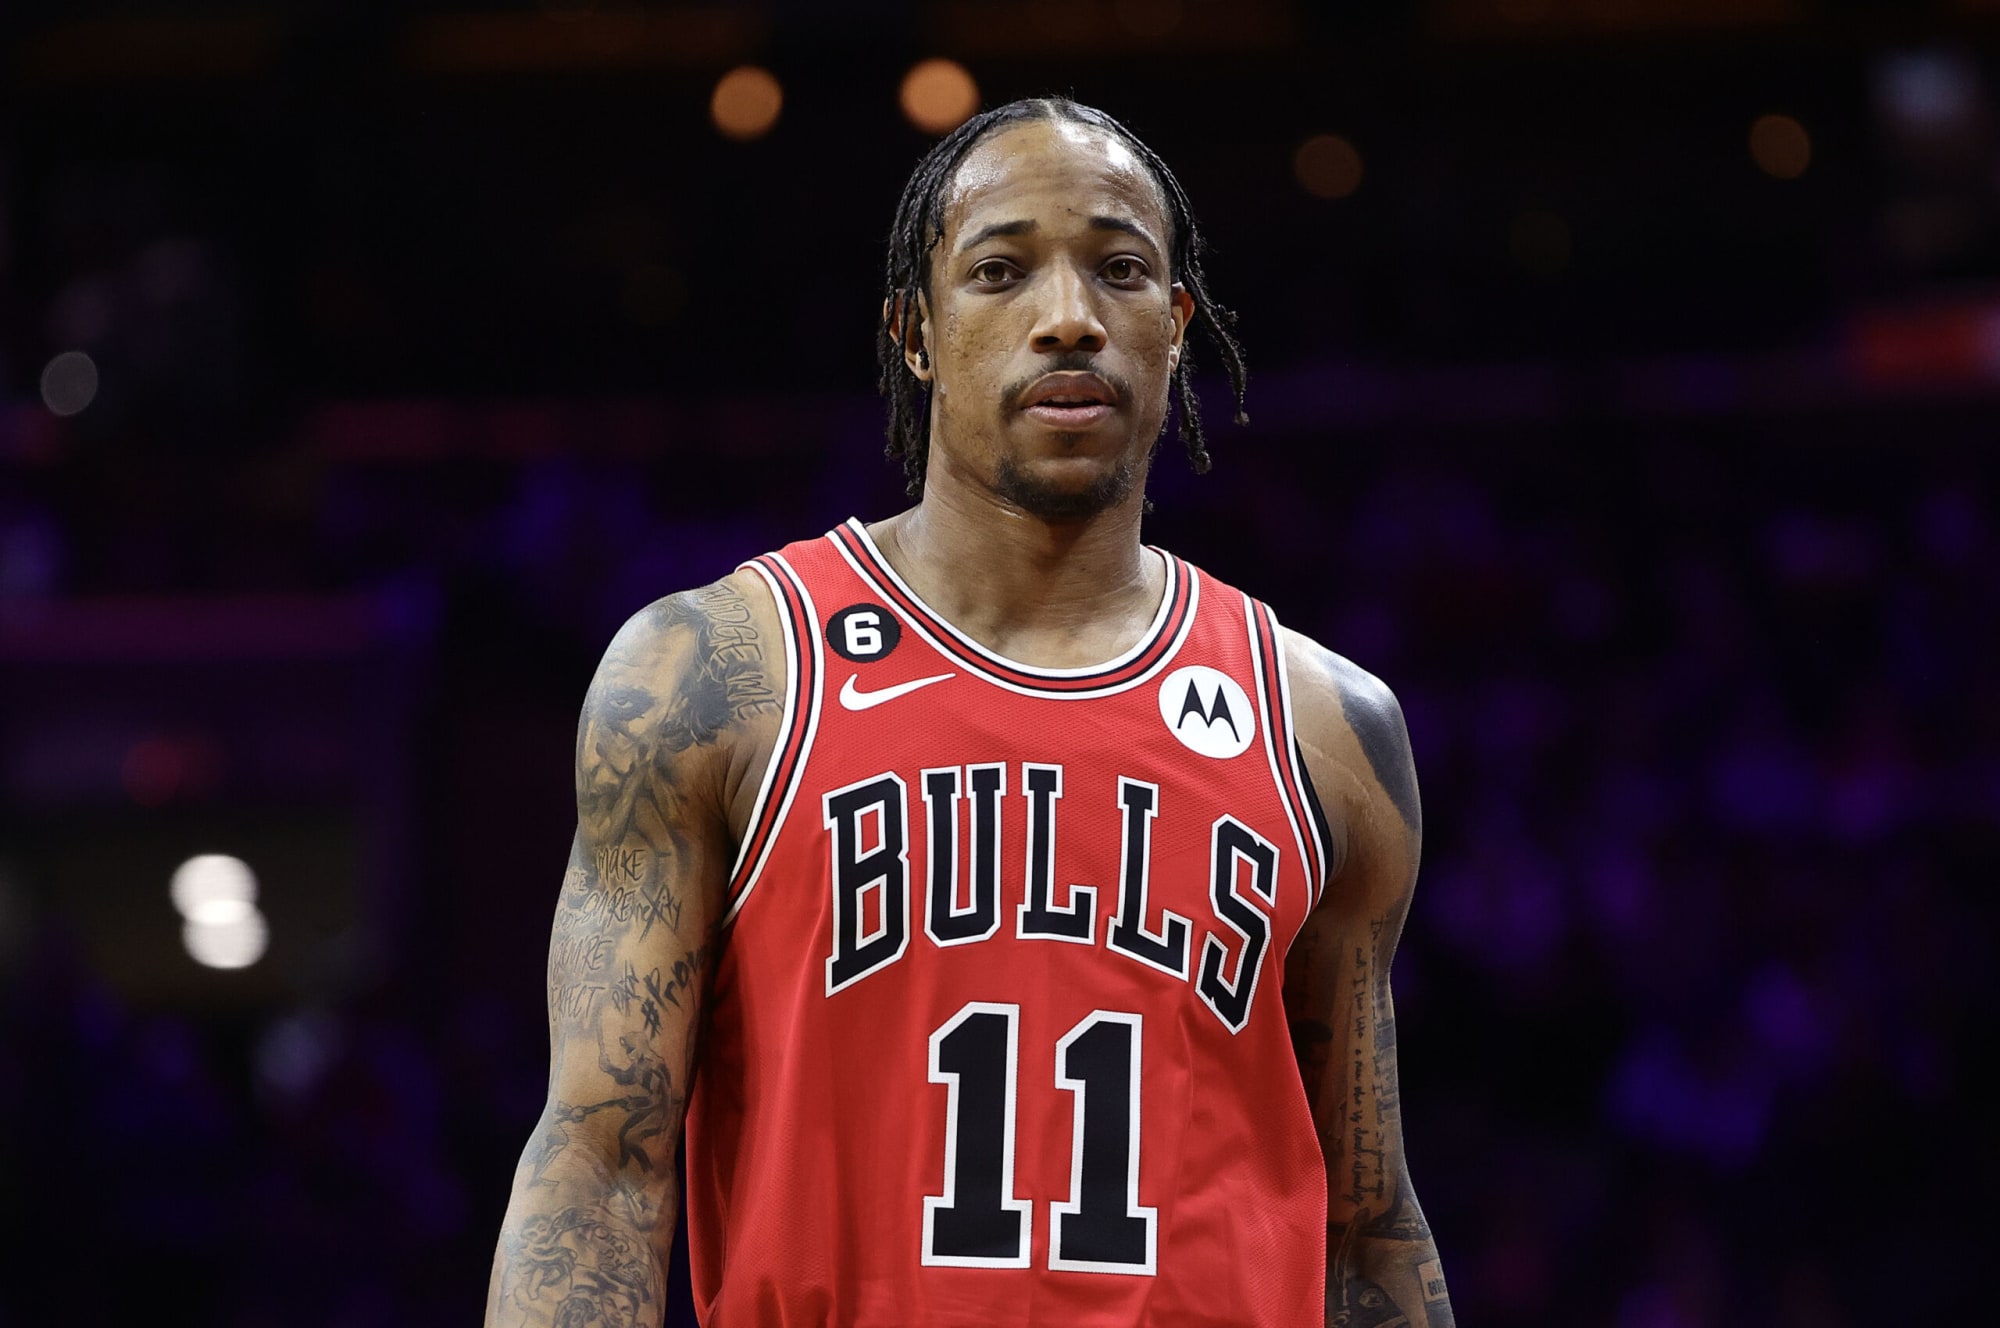 Lakers Rumors: Bulls' DeMar DeRozan Signs Four-Year Contract To